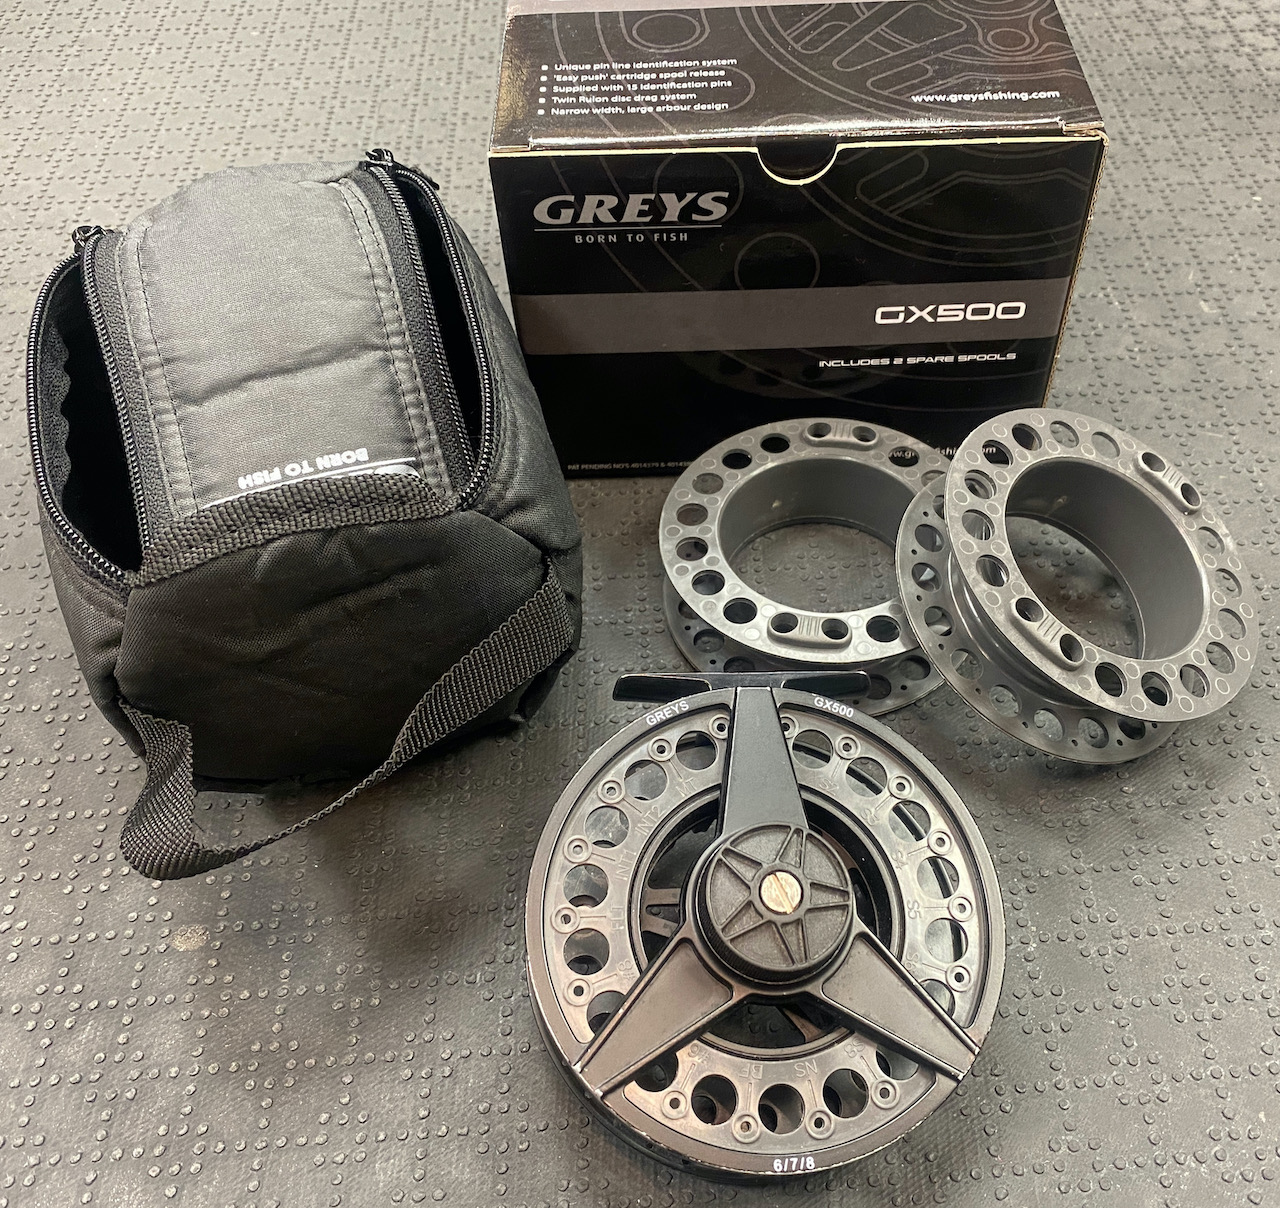 https://thefirstcast.ca/wp-content/uploads/2021/04/Greys-GX500-678-Fly-Reel-and-2-Spare-Spools-BB.jpeg